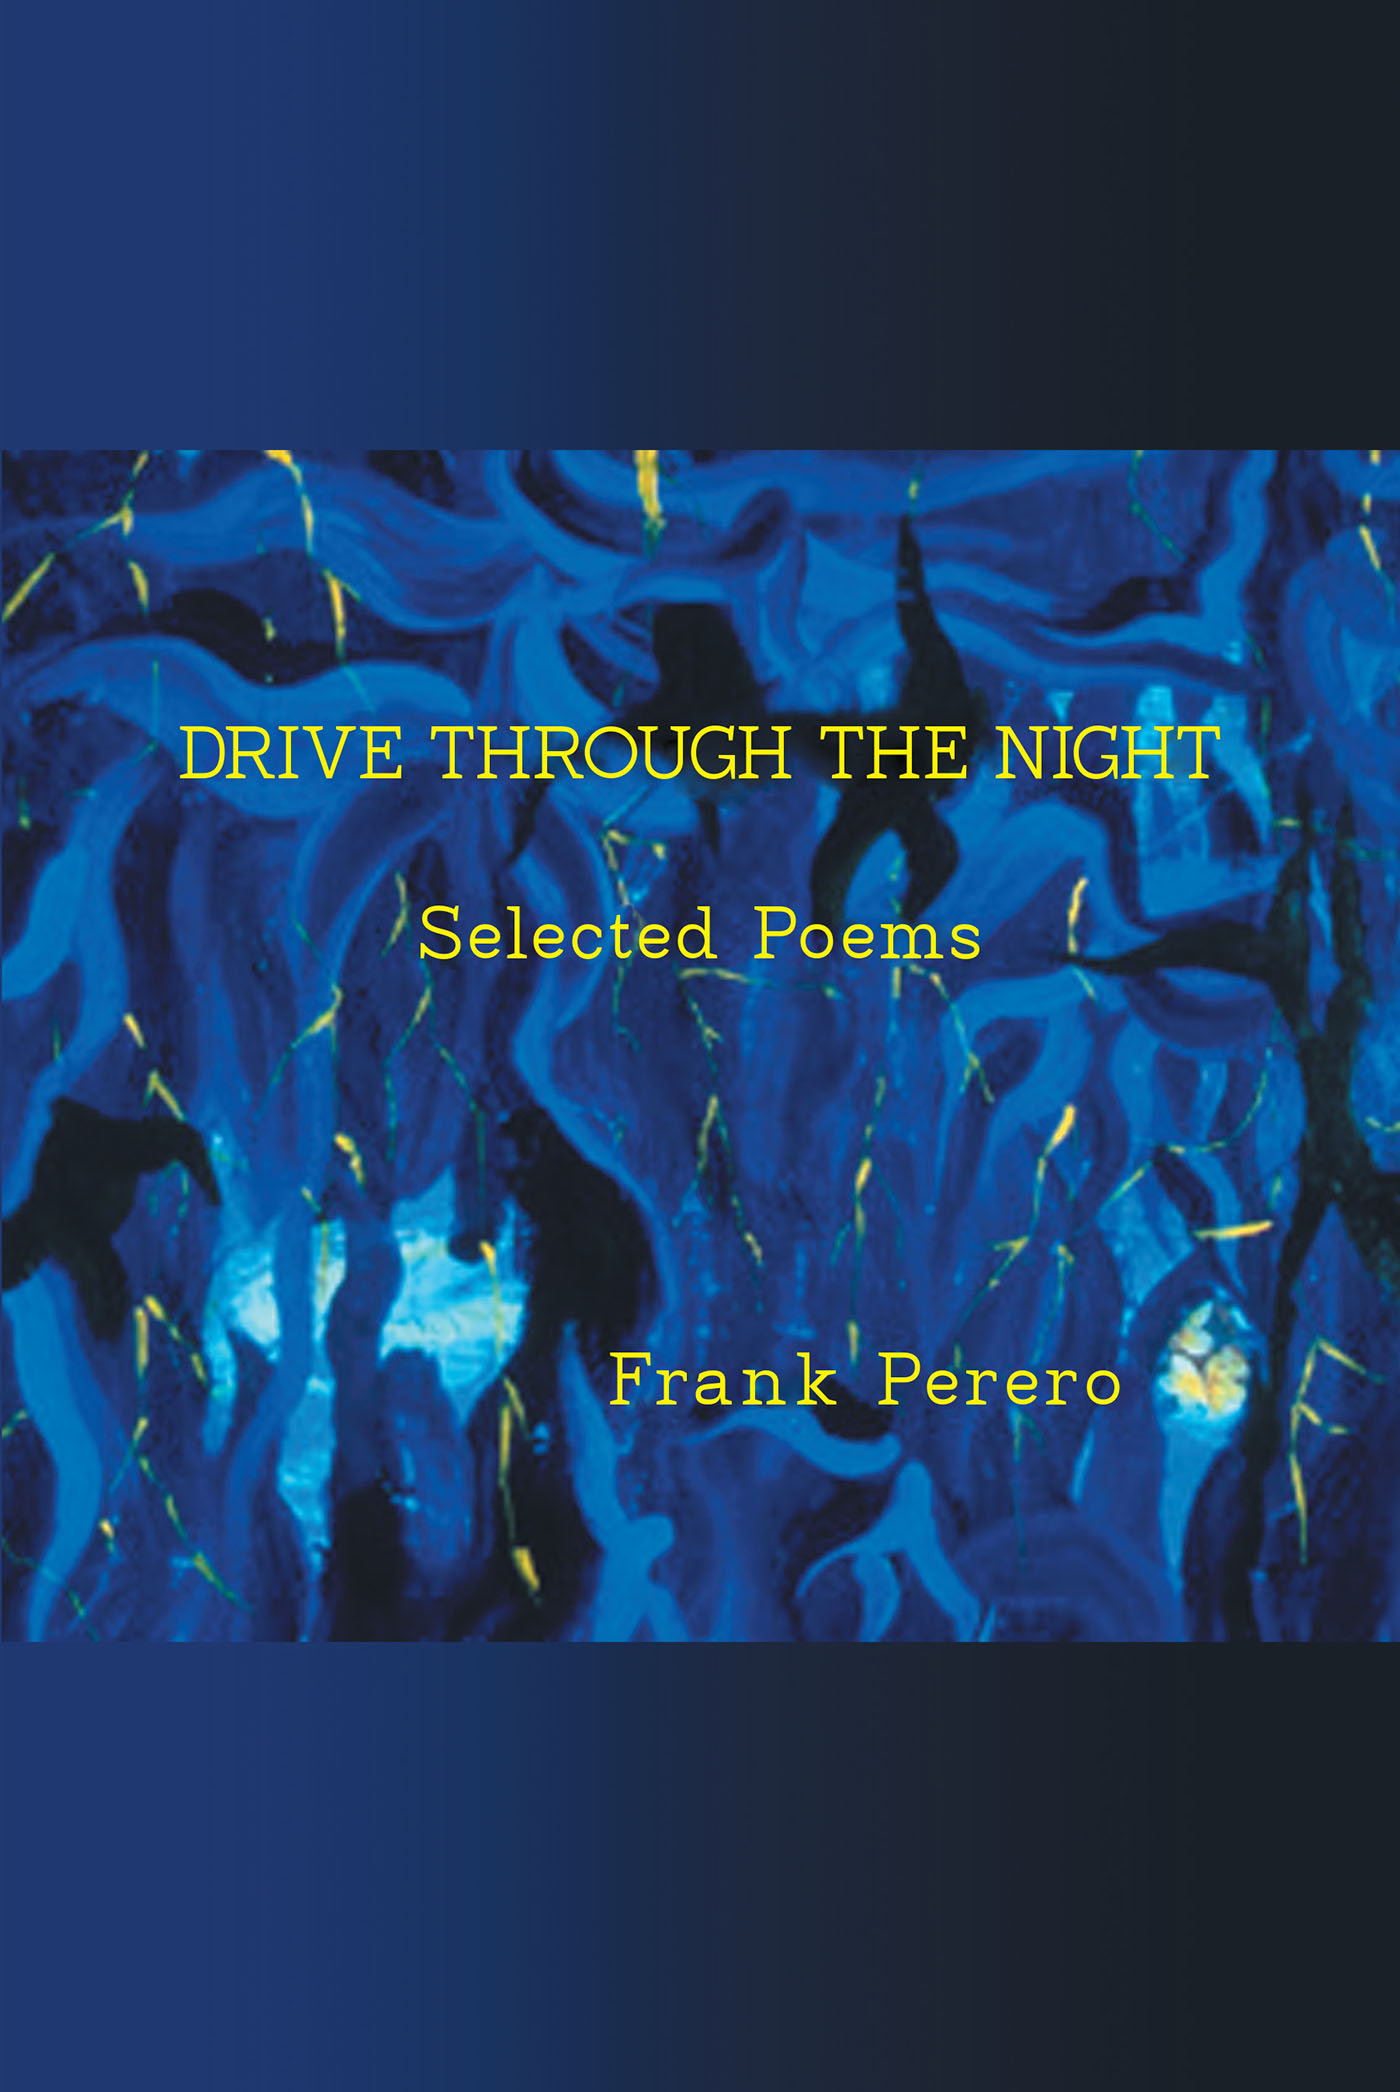 Author Frank Perero’s New Book, "Drive through the Night: Selected Poems," is a Slim Volume of Evocative Poetry Capturing the Essence of the Modern Human Experience